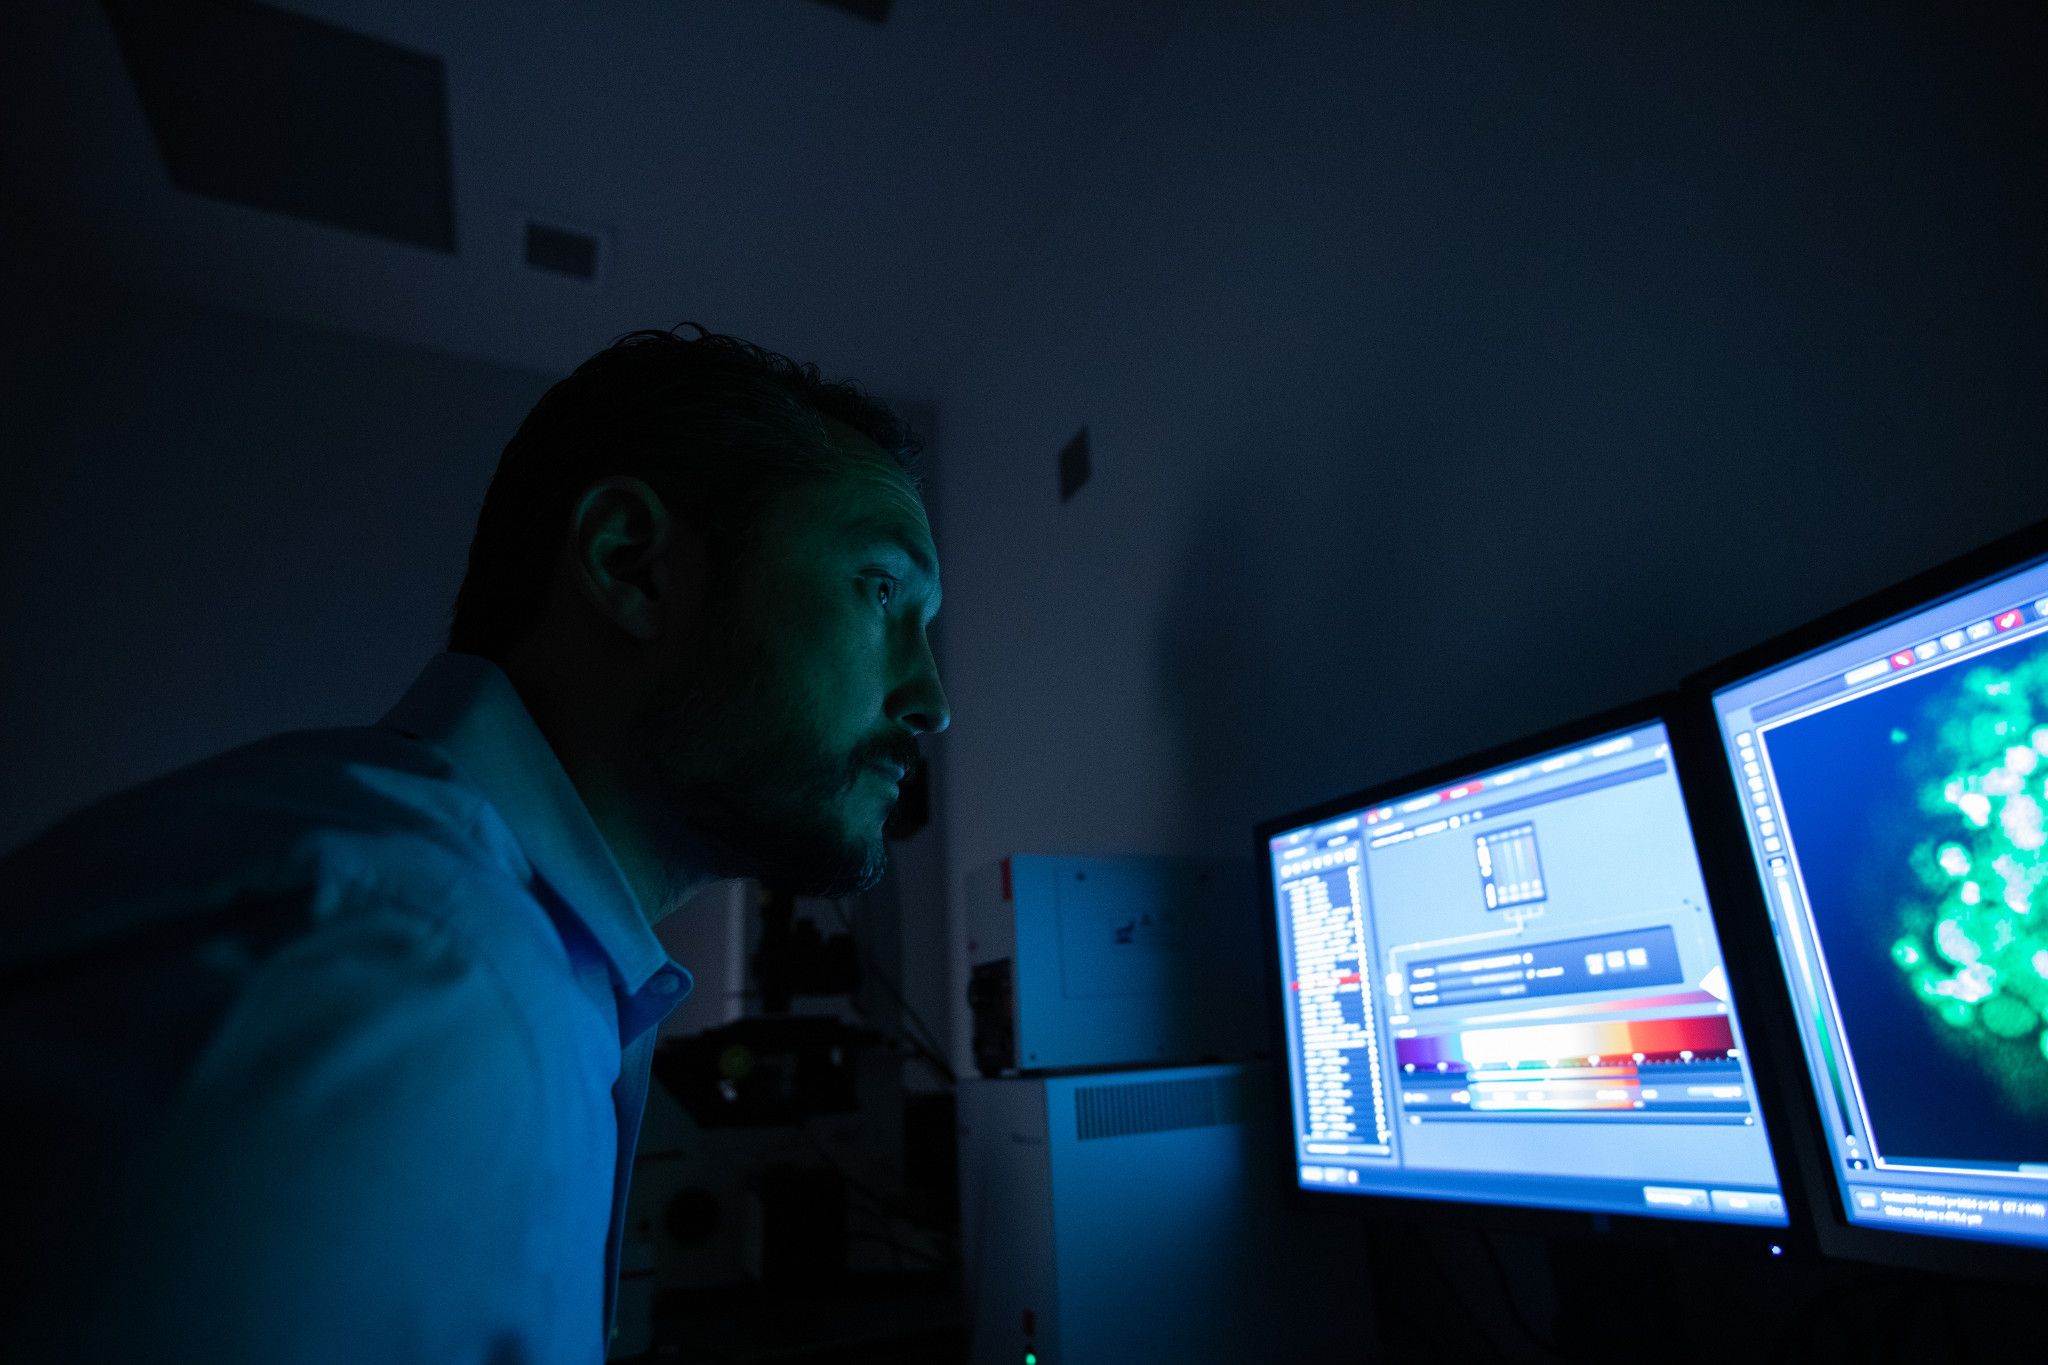 Robert Kellar in a dark room looking at a computer screen that casts a blue glow over him and the room